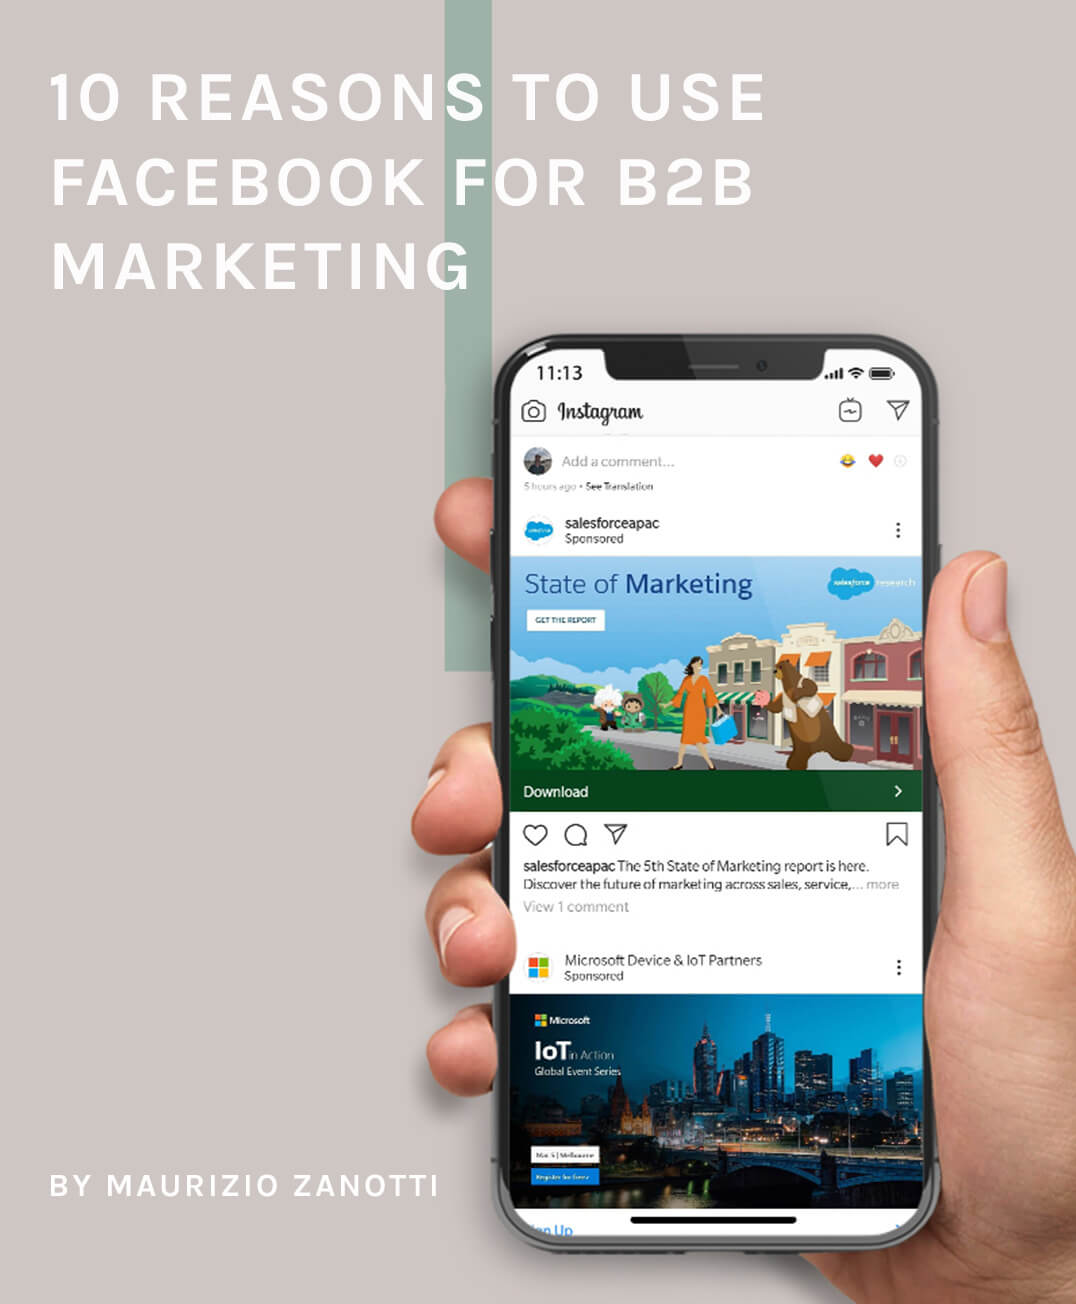 10 reasons to use Facebook for B2B Marketing